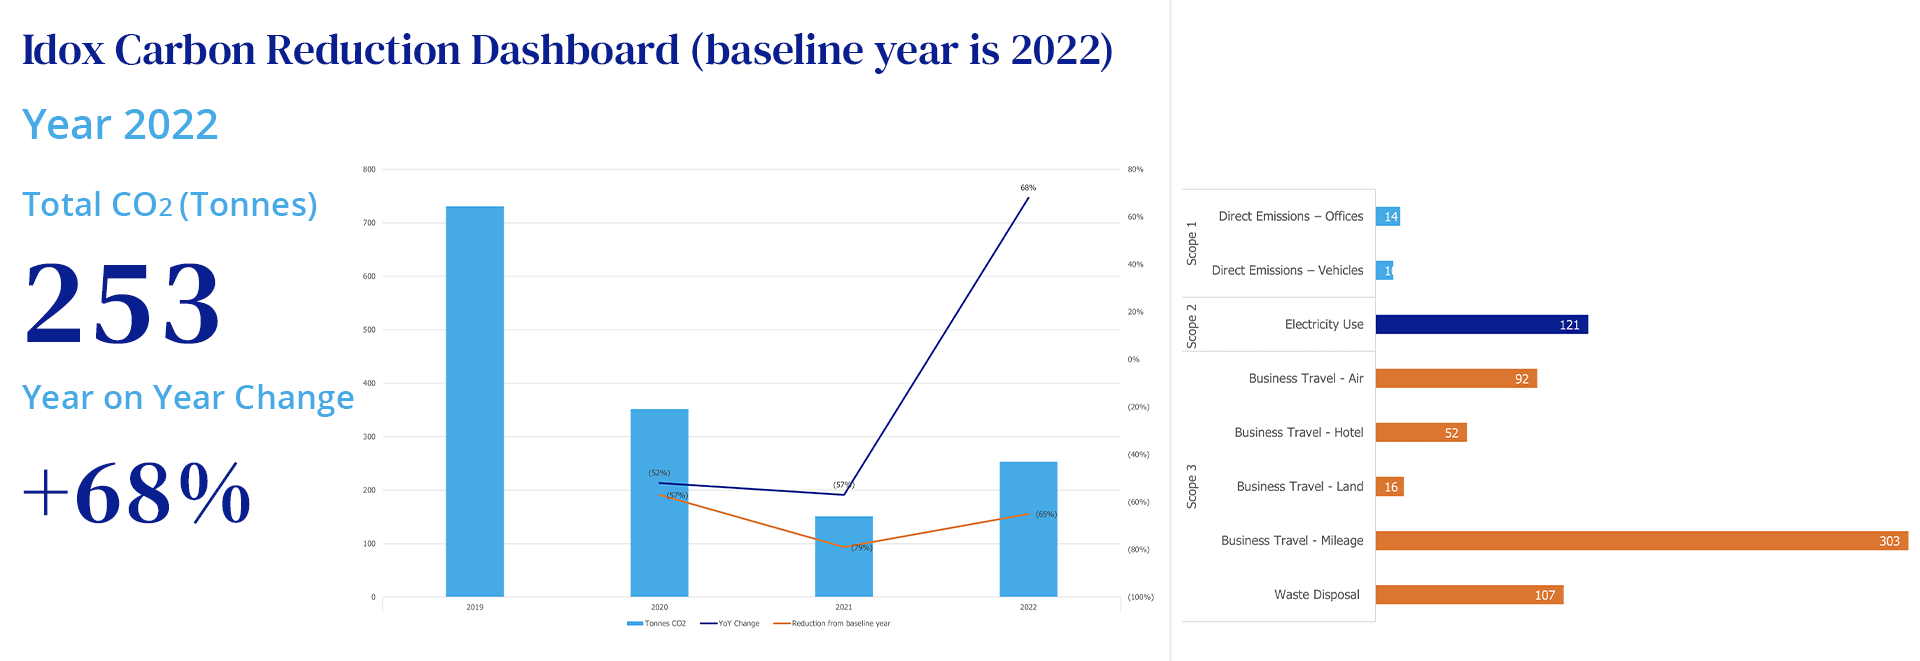 Carbon reduction dashboard 2022